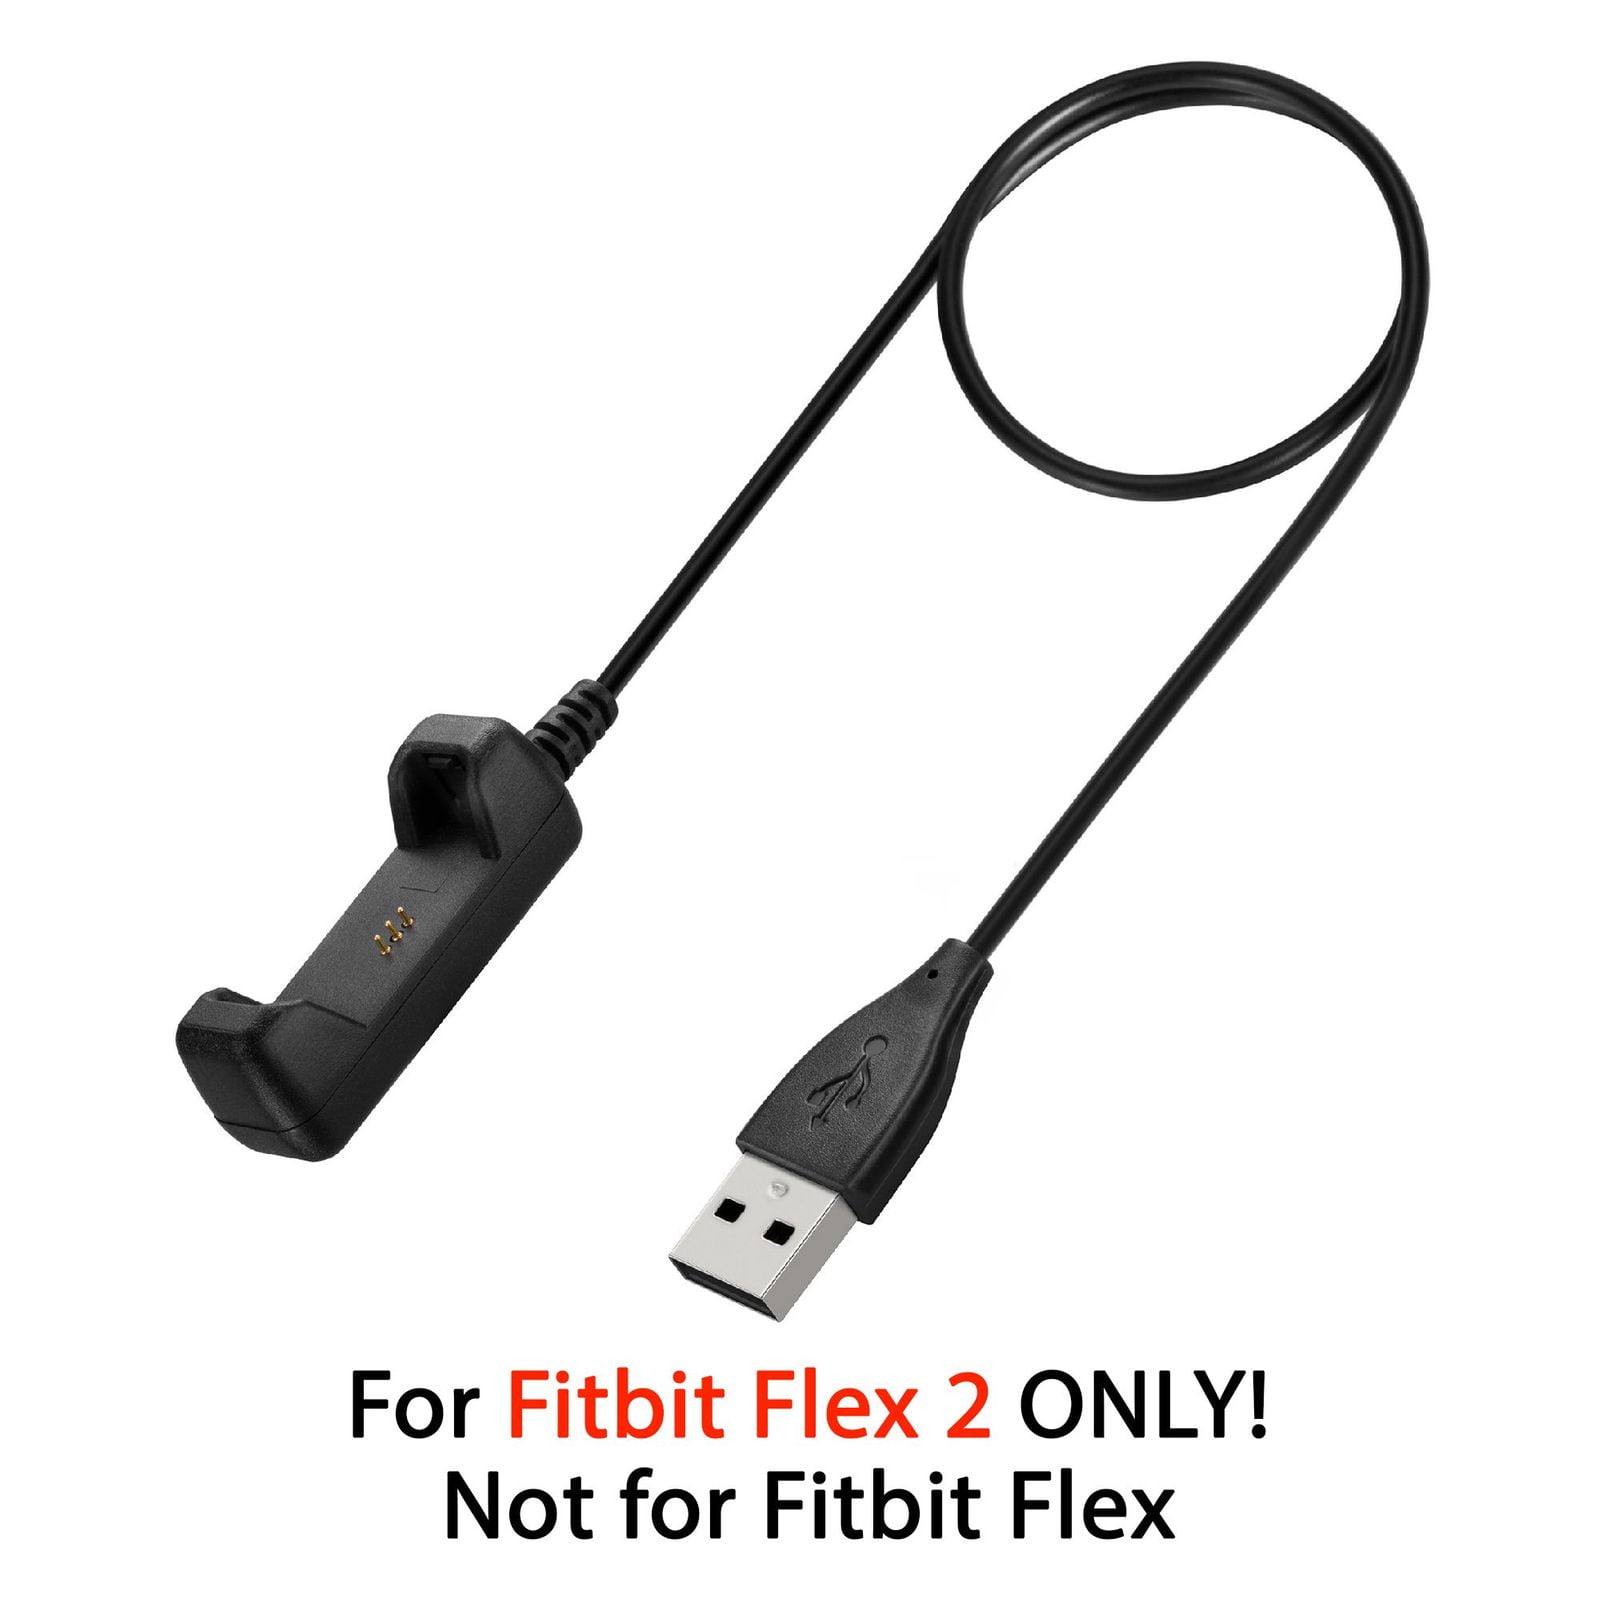 1 X New Replacement USB Charger Cable for Fitbit Flex/Fibit Charge 2  Wristband 